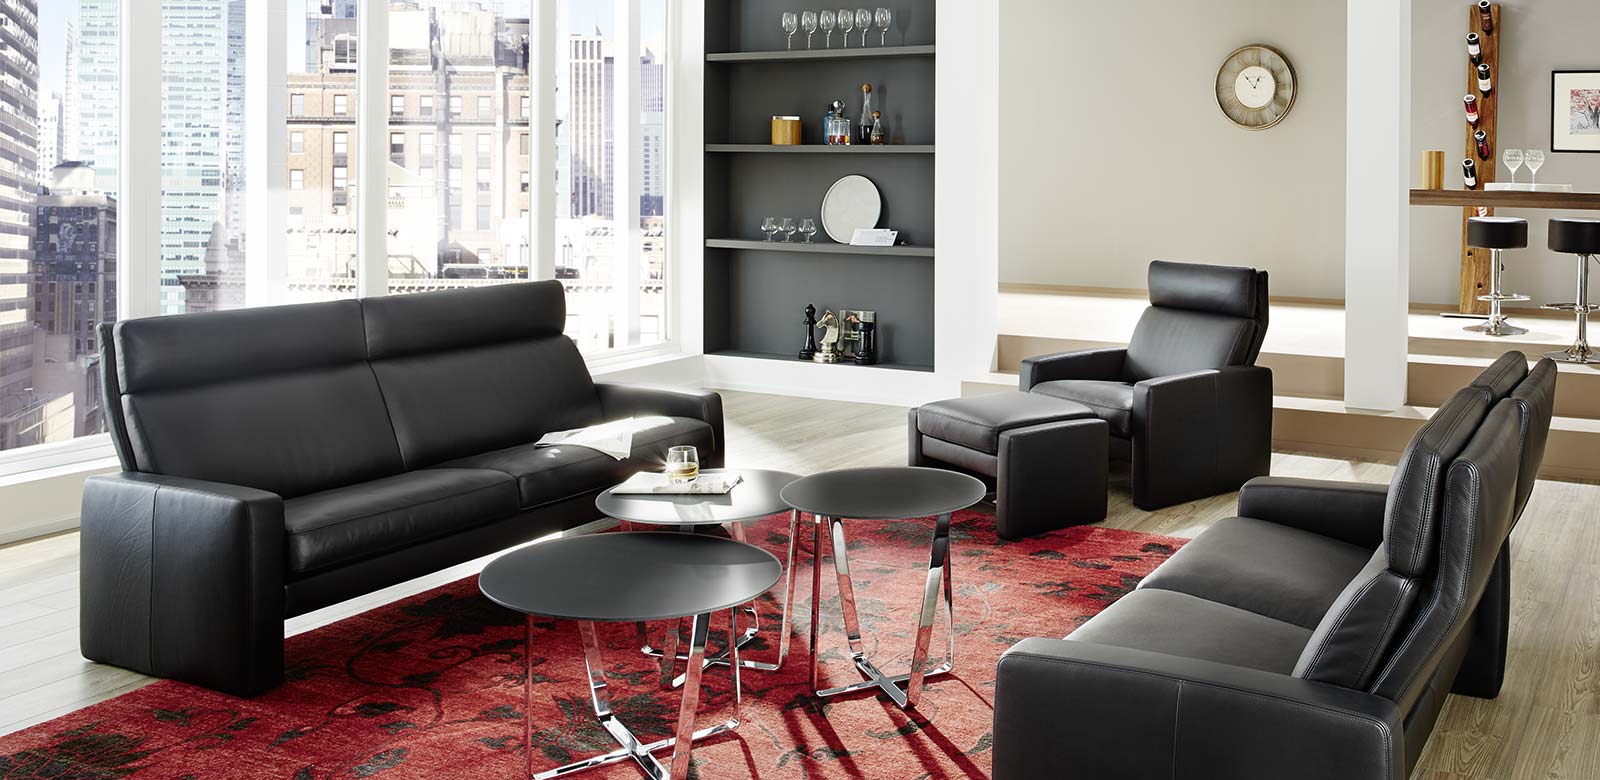 Arosa Couch with armchair and stool in black leather, black round side tables and red carpet.